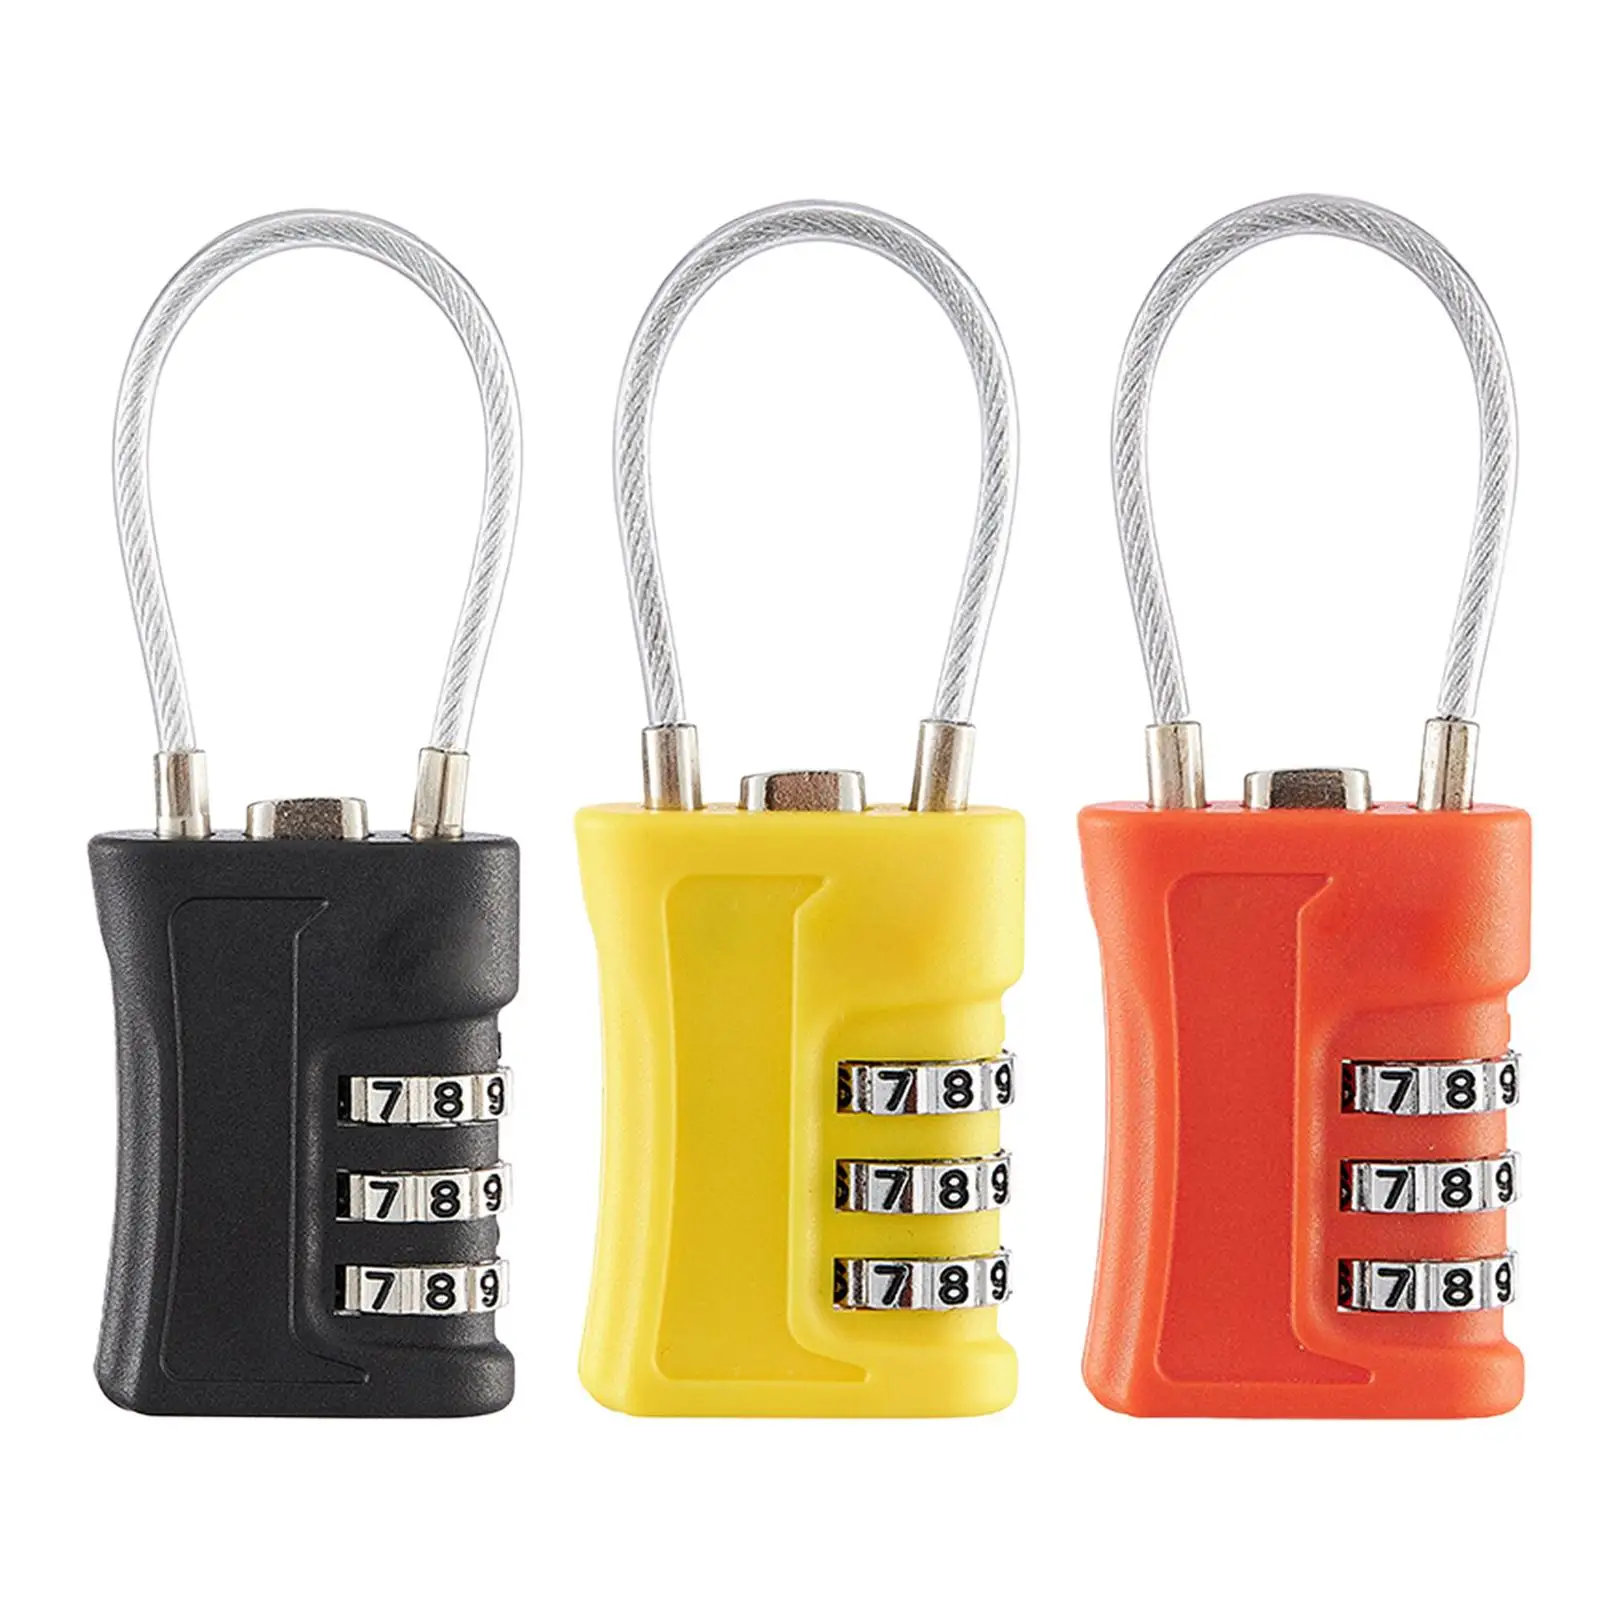 3 Digit Combination Lock Small Locks for Going Abroad Outdoor Travel Baggage